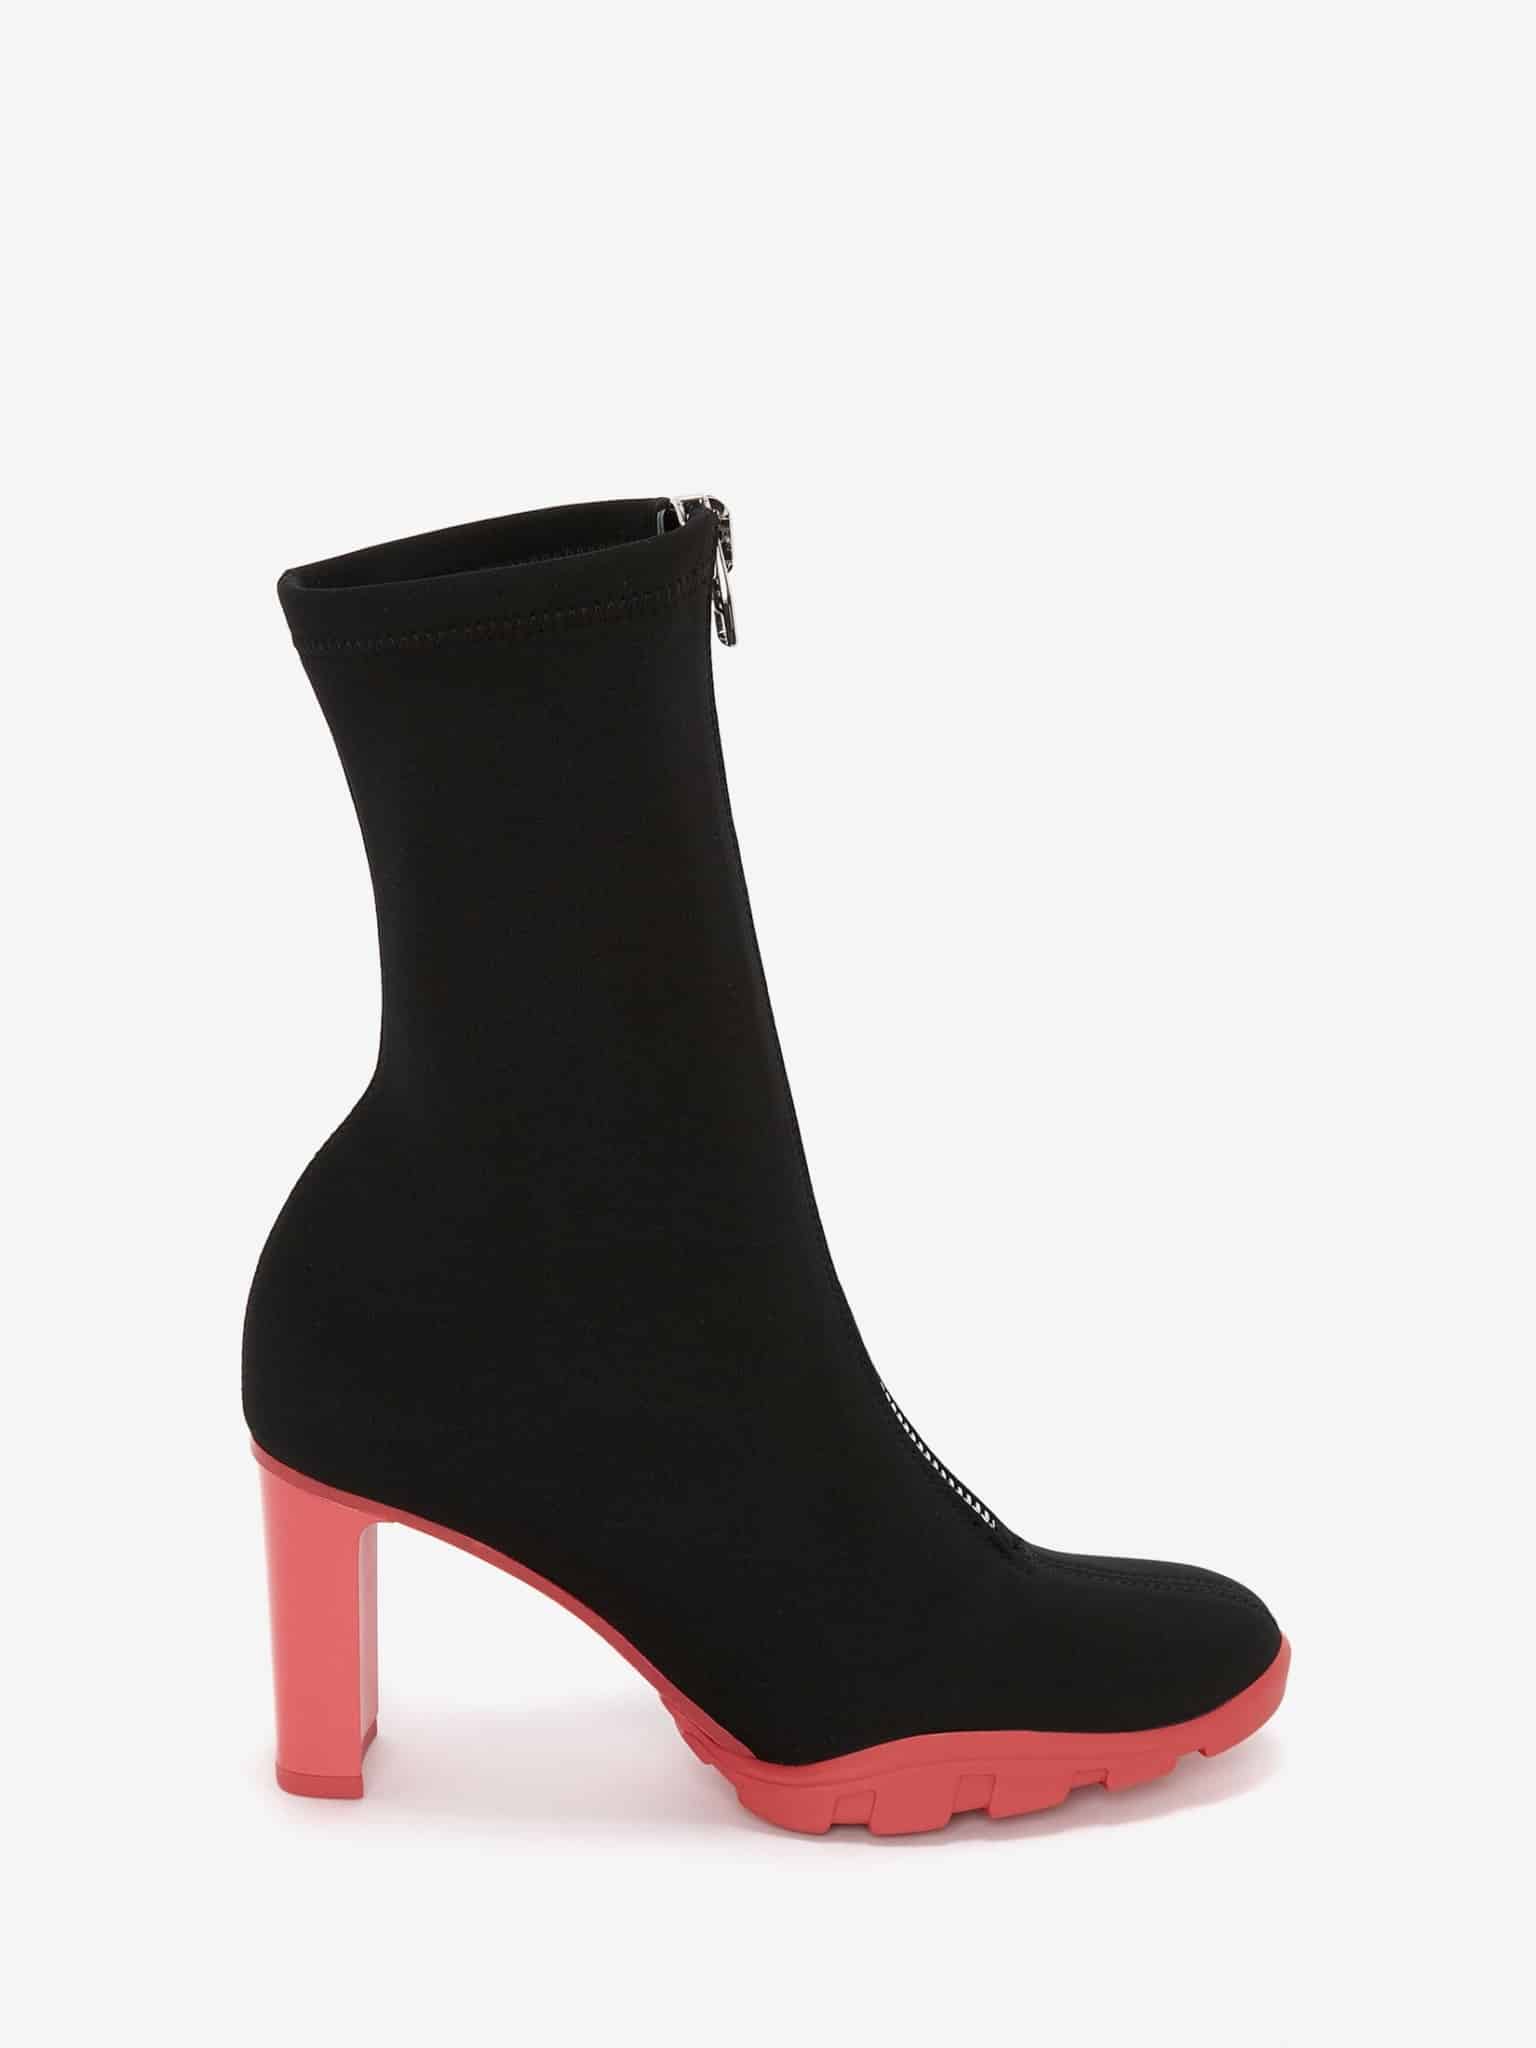 Ankle boot rosa nero